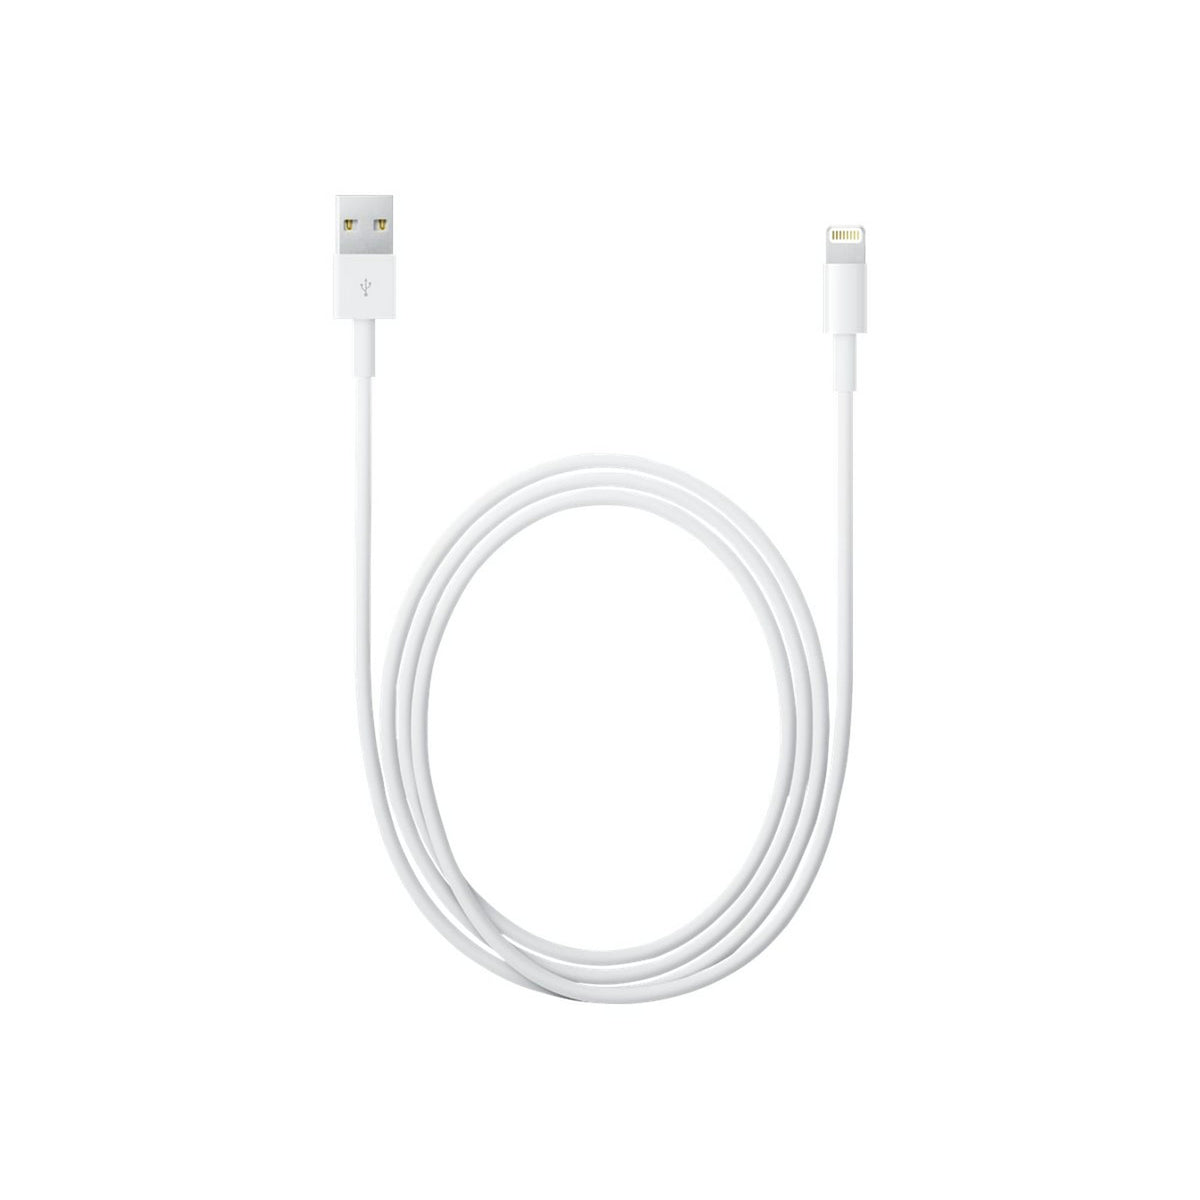 Apple Lightning to USB Cable - 2M / 6Ft